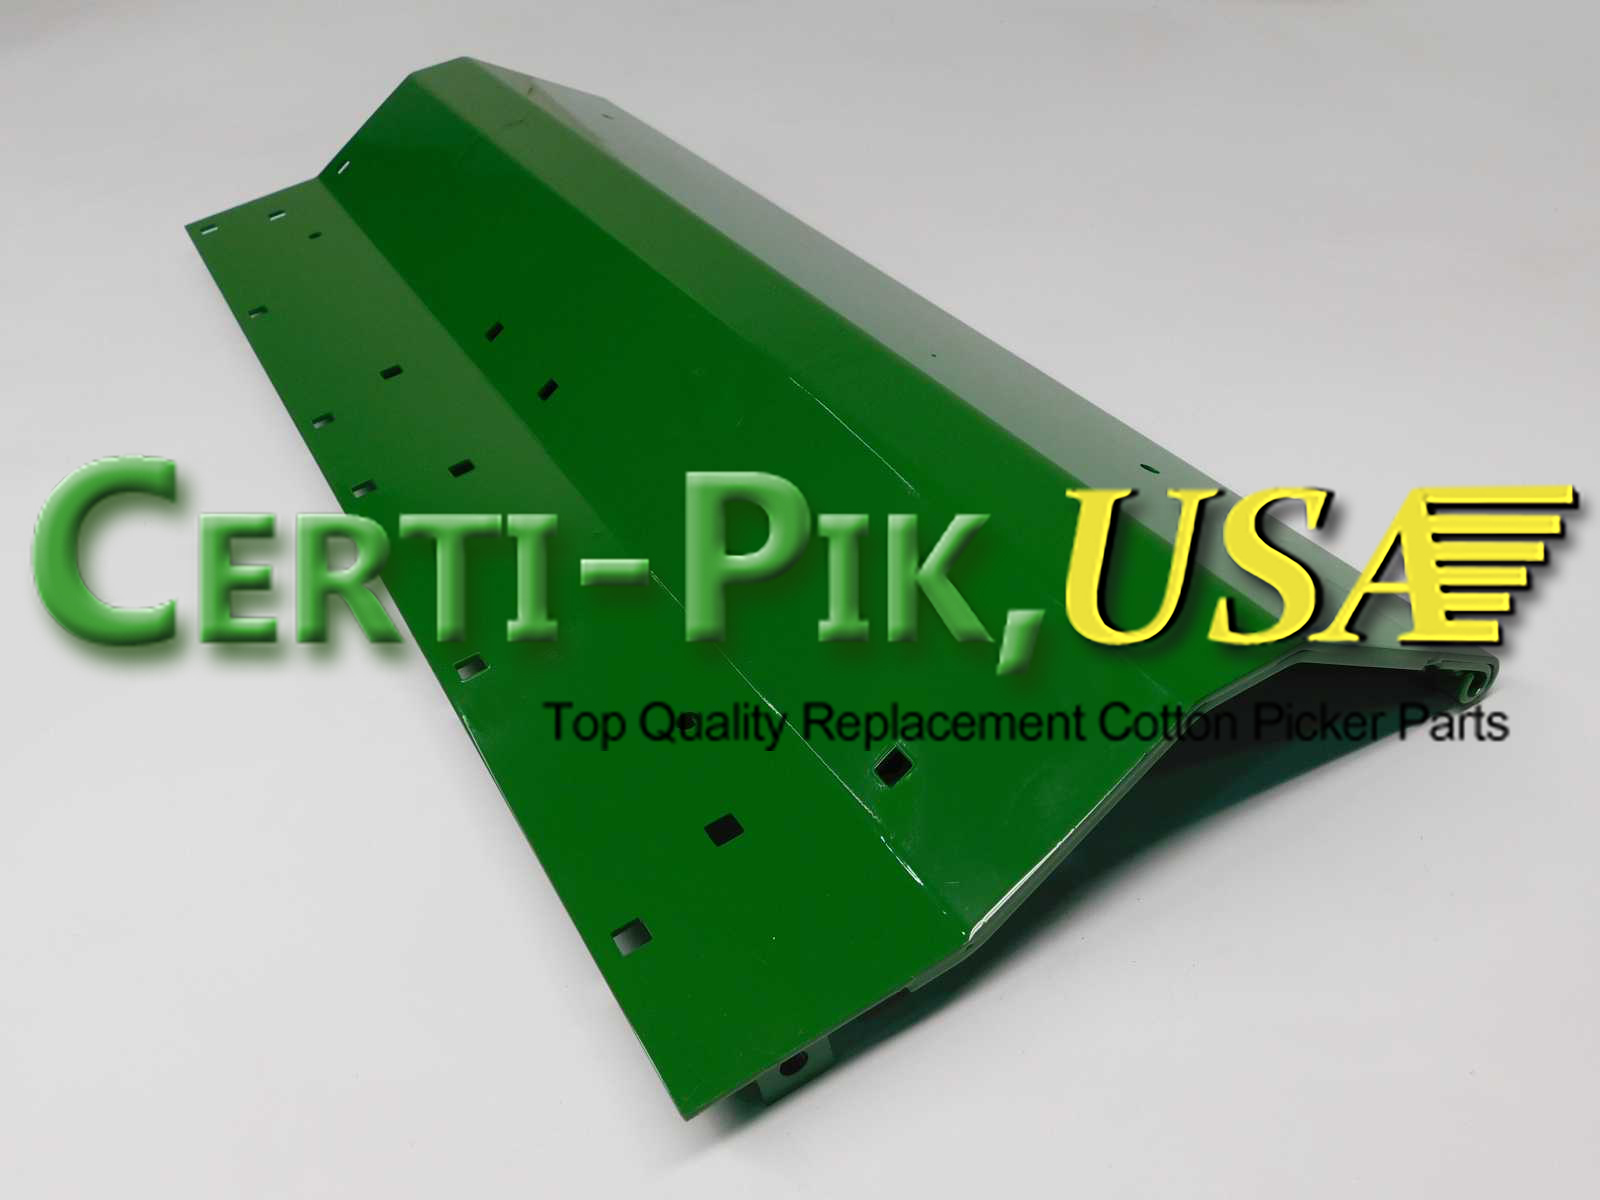 Picking Unit Cabinet: John Deere 9976-CP690 20S Pressure Plate Assembly AN279558 (79558) for Sale